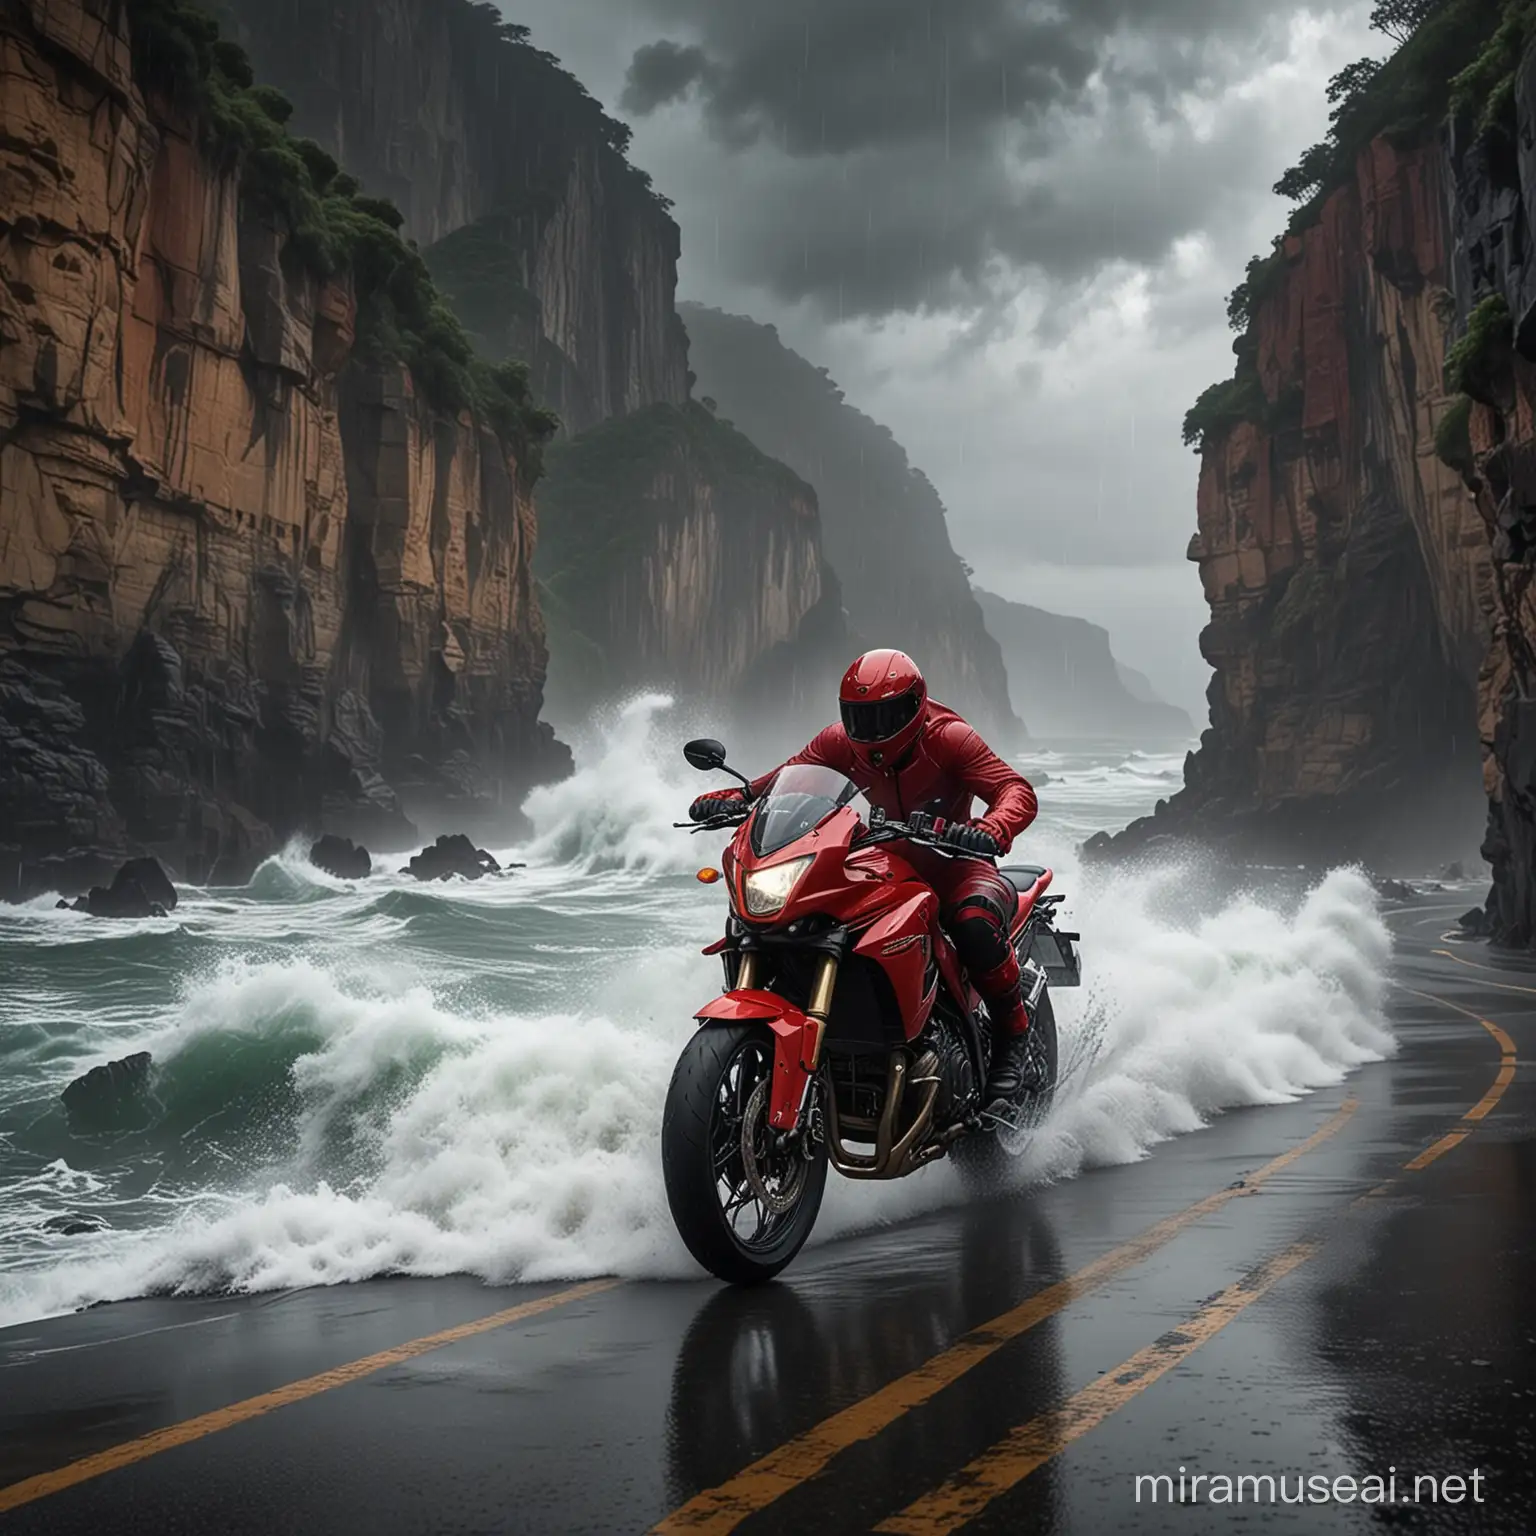 Dramatic Motorcycle Ride in Stormy Weather with Flash Rider